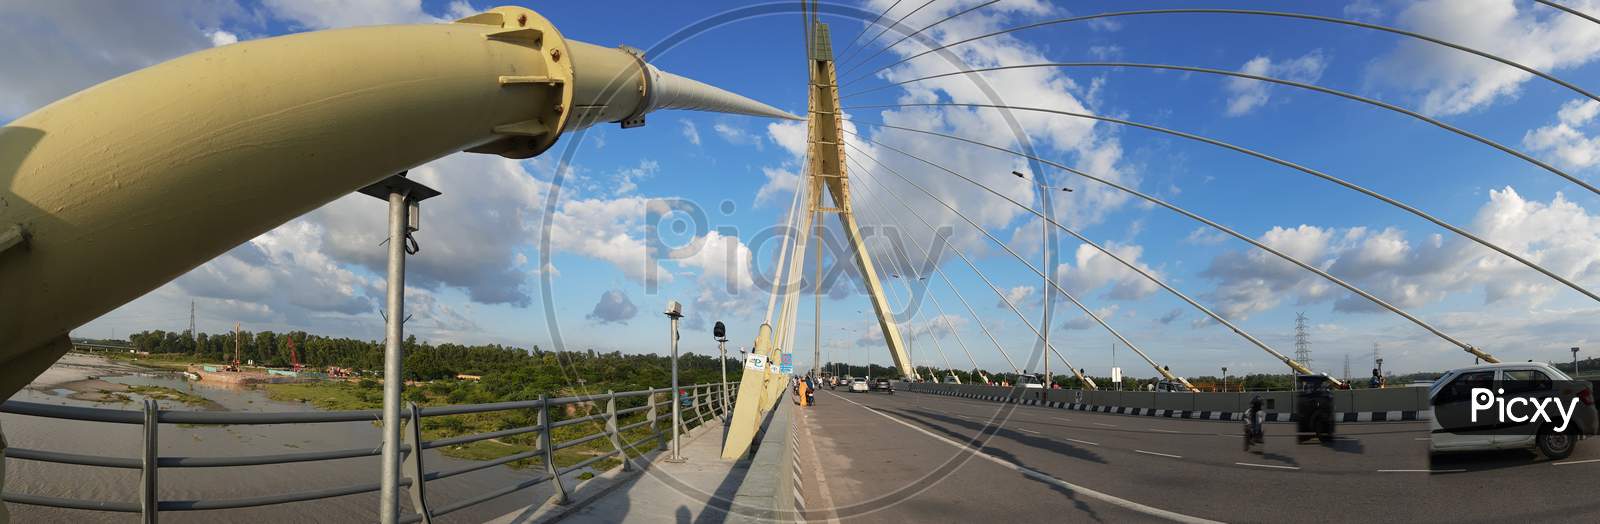 Signature Bridge Is A Cantilever Spar Cable-Stayed Bridge Which Spans The Yamuna River At Wazirabad Section, Connecting Wazirabad To East Delhi.